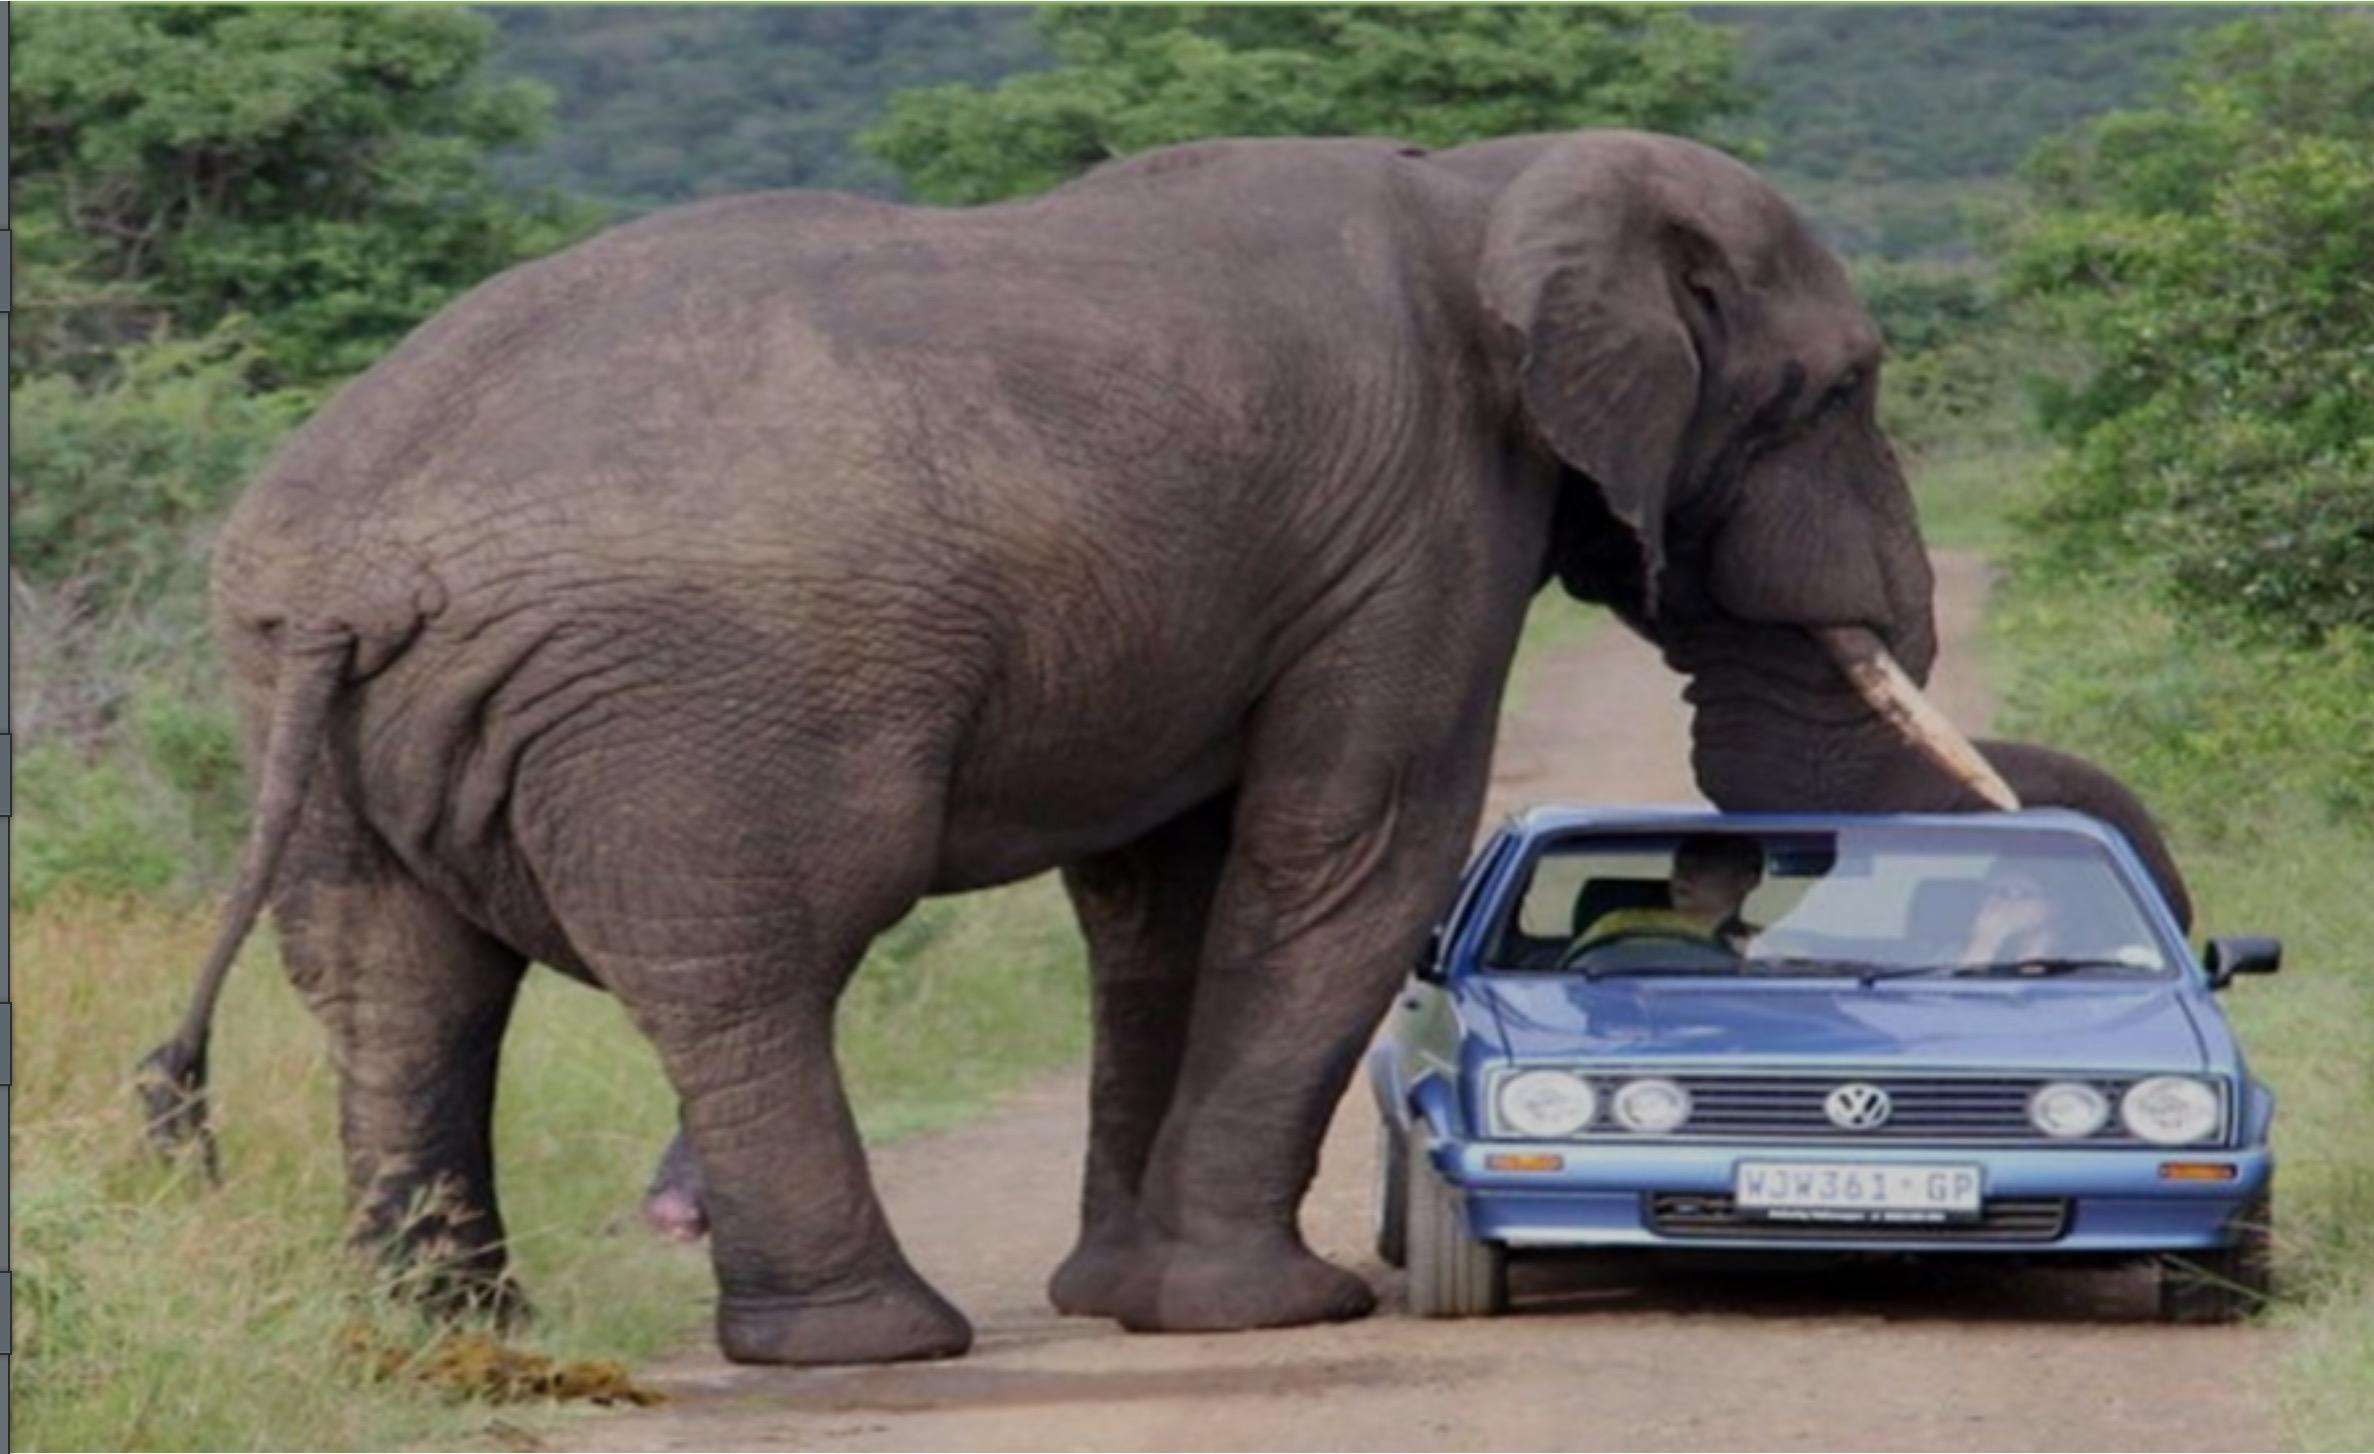 The picture shows an African bush elephant whose trunk rests on a car. African Insurance - World insurance Companies Logos